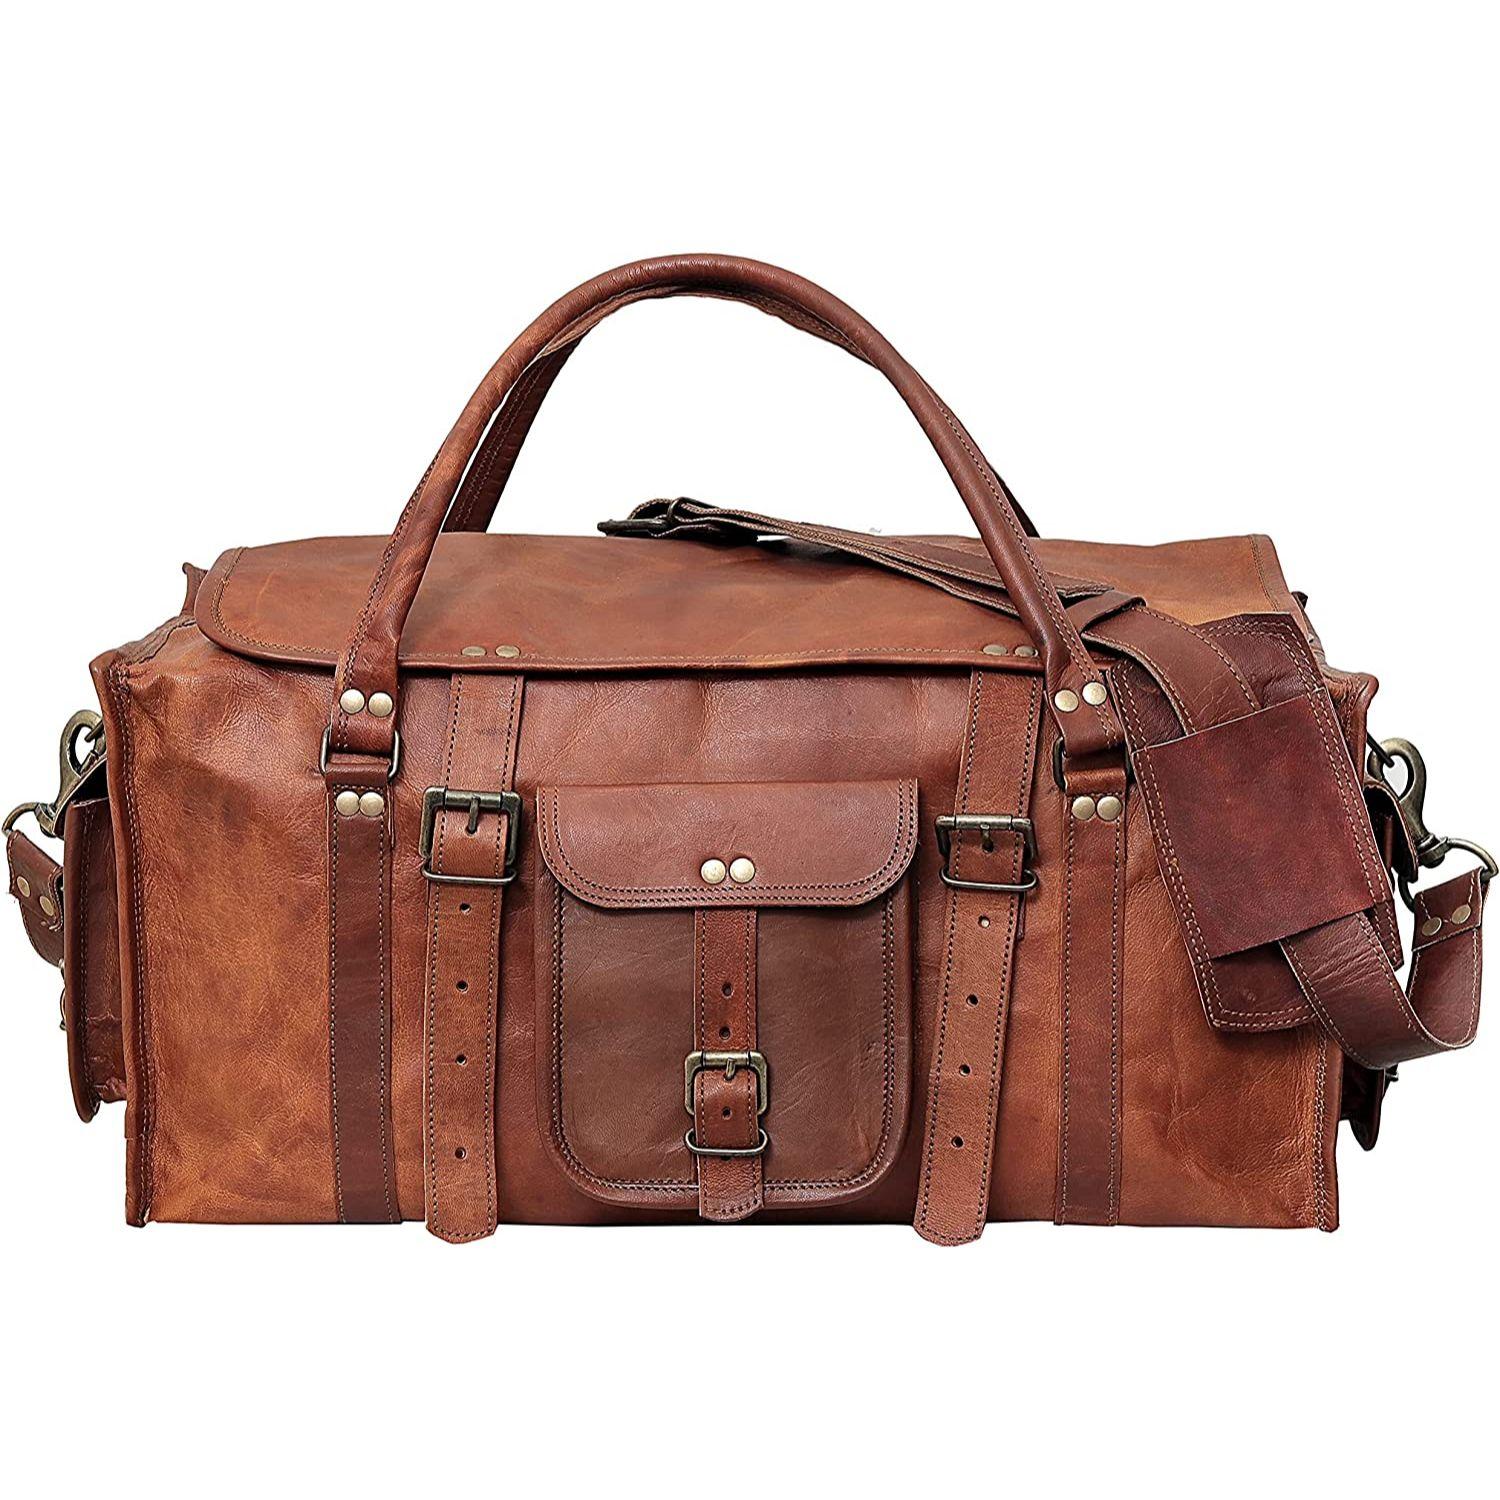 Vintage Goat leather Bags Mens Retro Style Carry on Luggage Flap Duffel Leather Duffel Bag